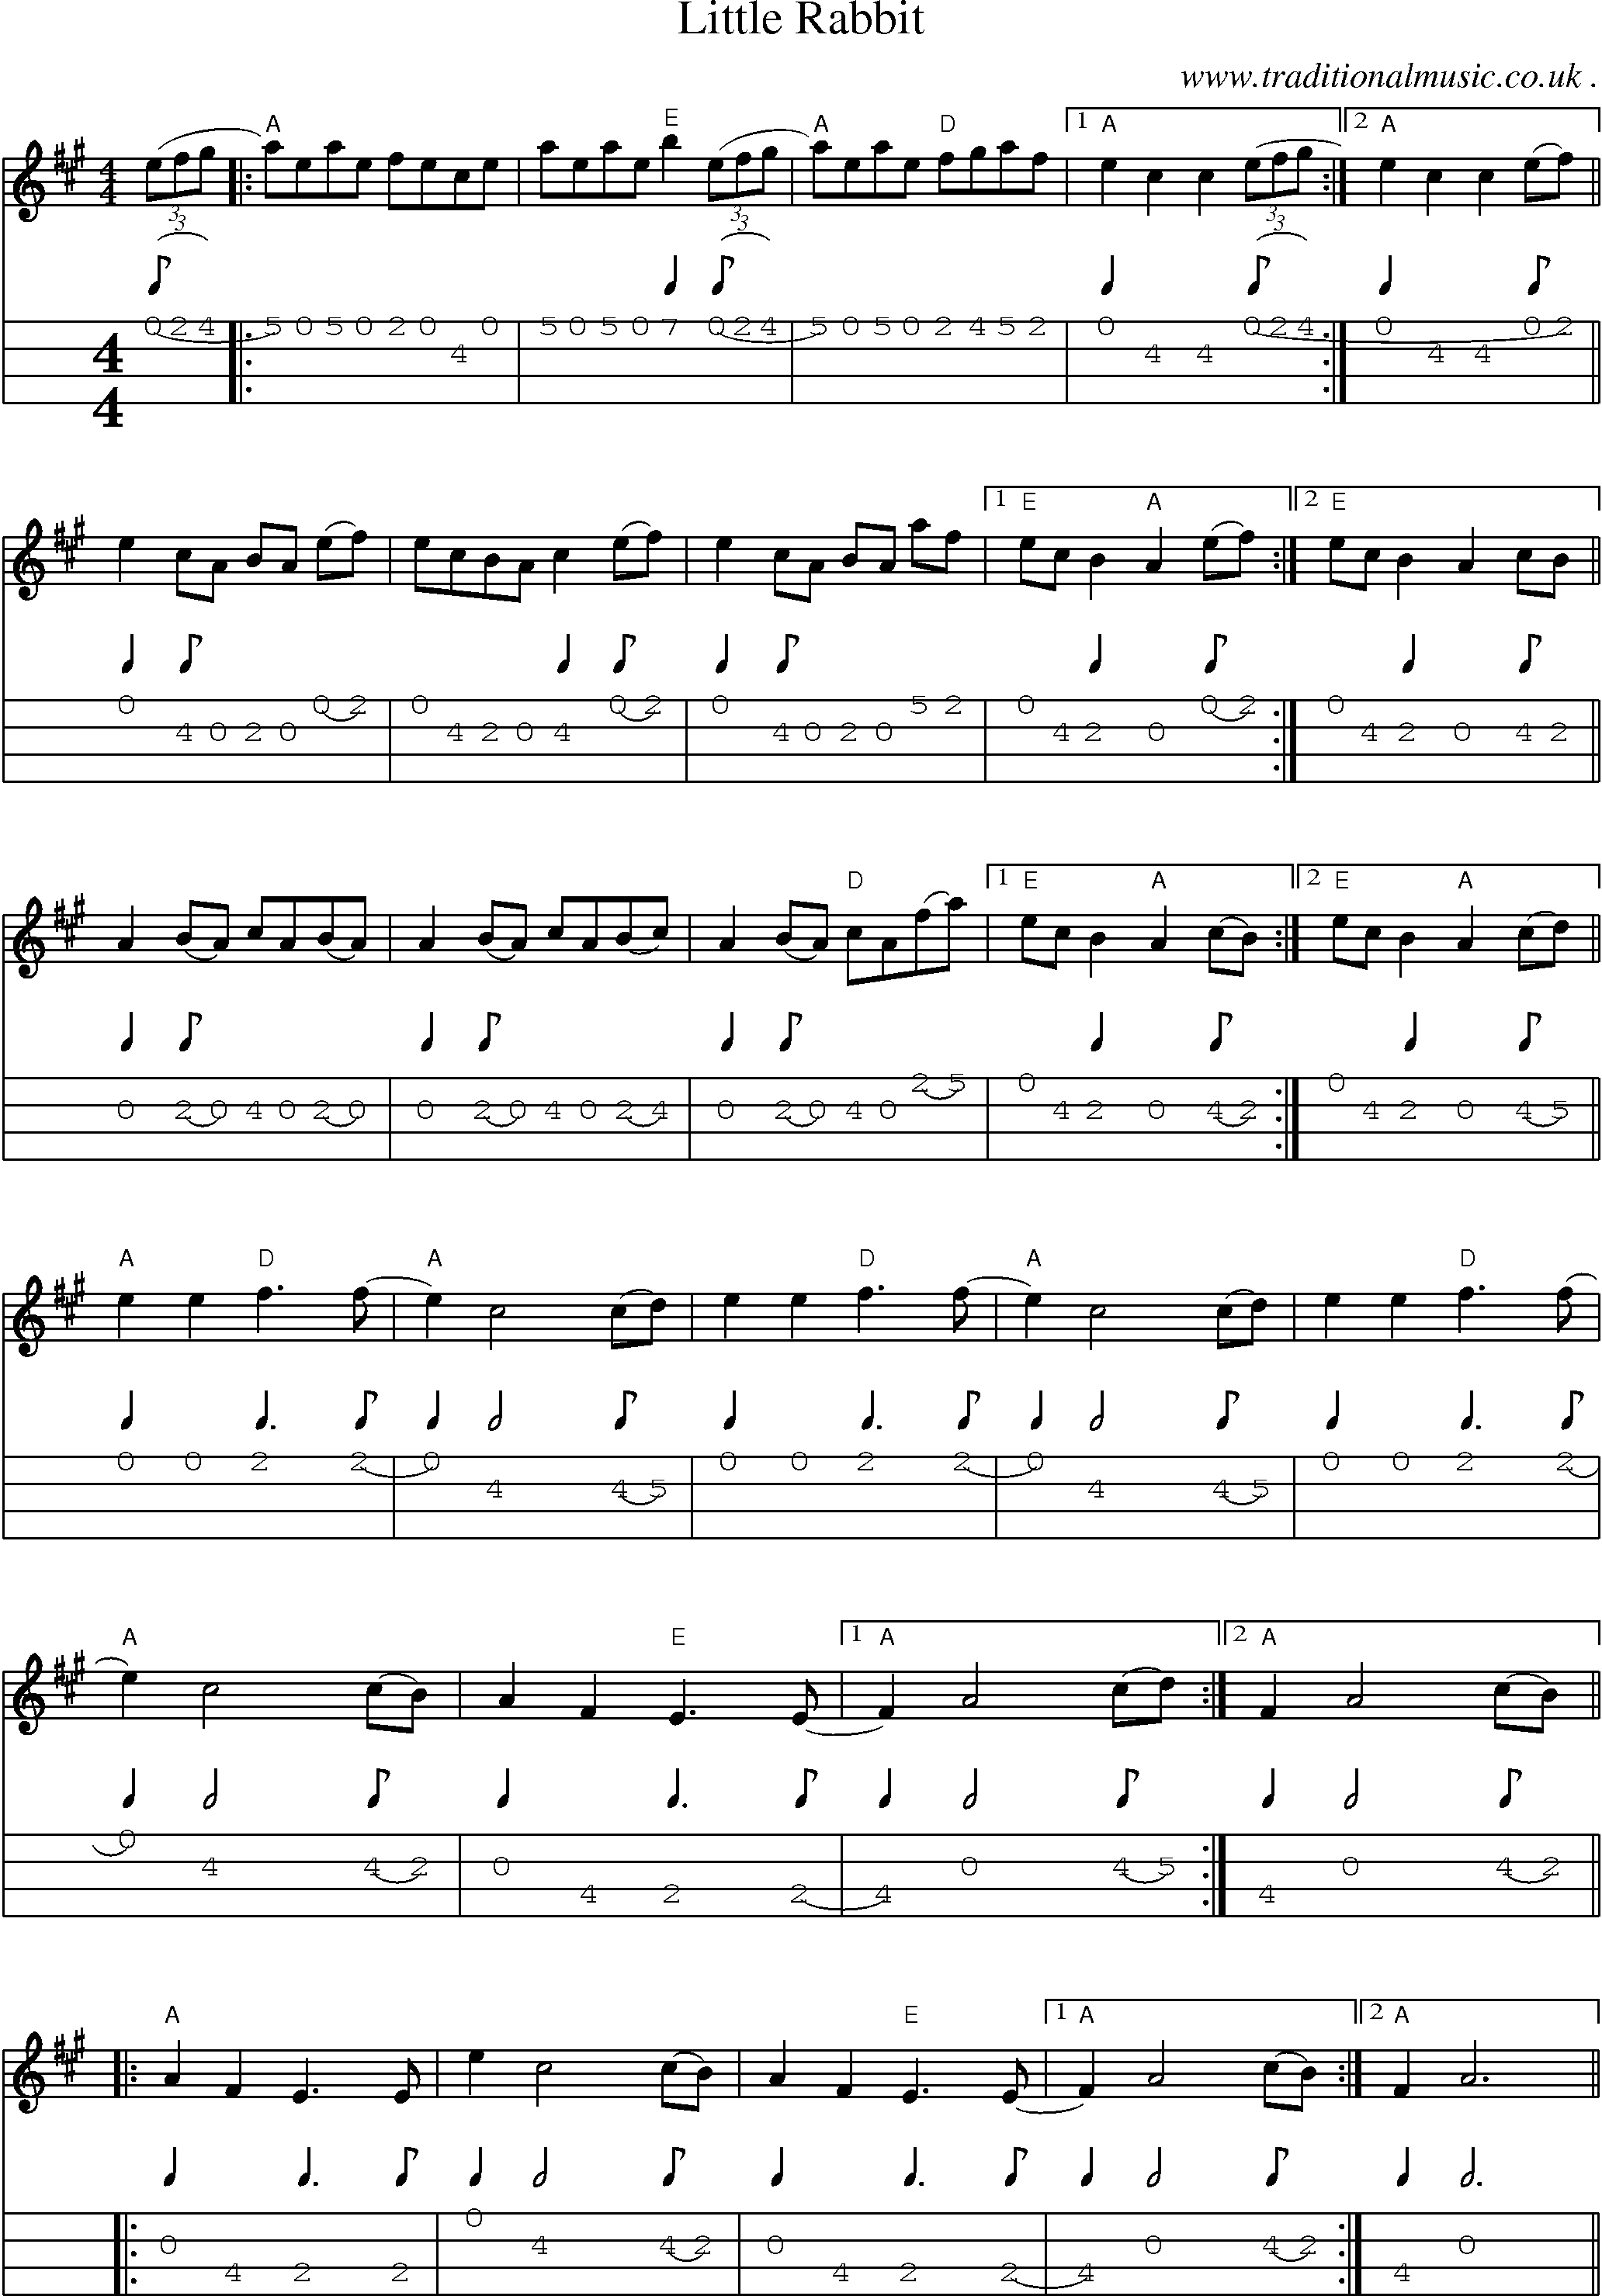 Music Score and Guitar Tabs for Little Rabbit